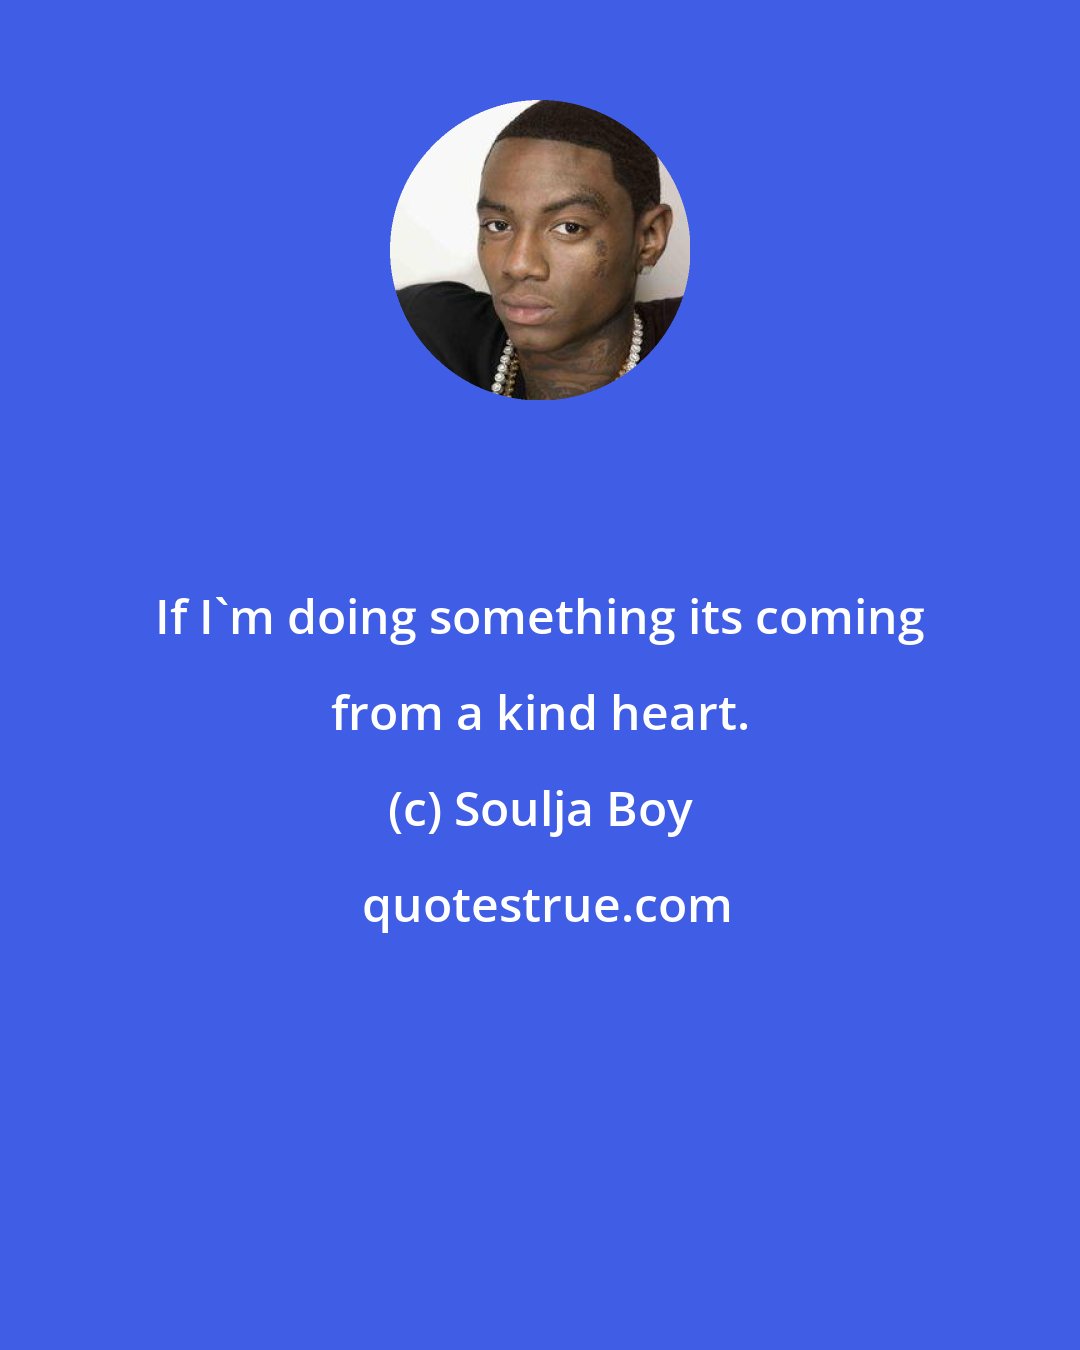 Soulja Boy: If I'm doing something its coming from a kind heart.